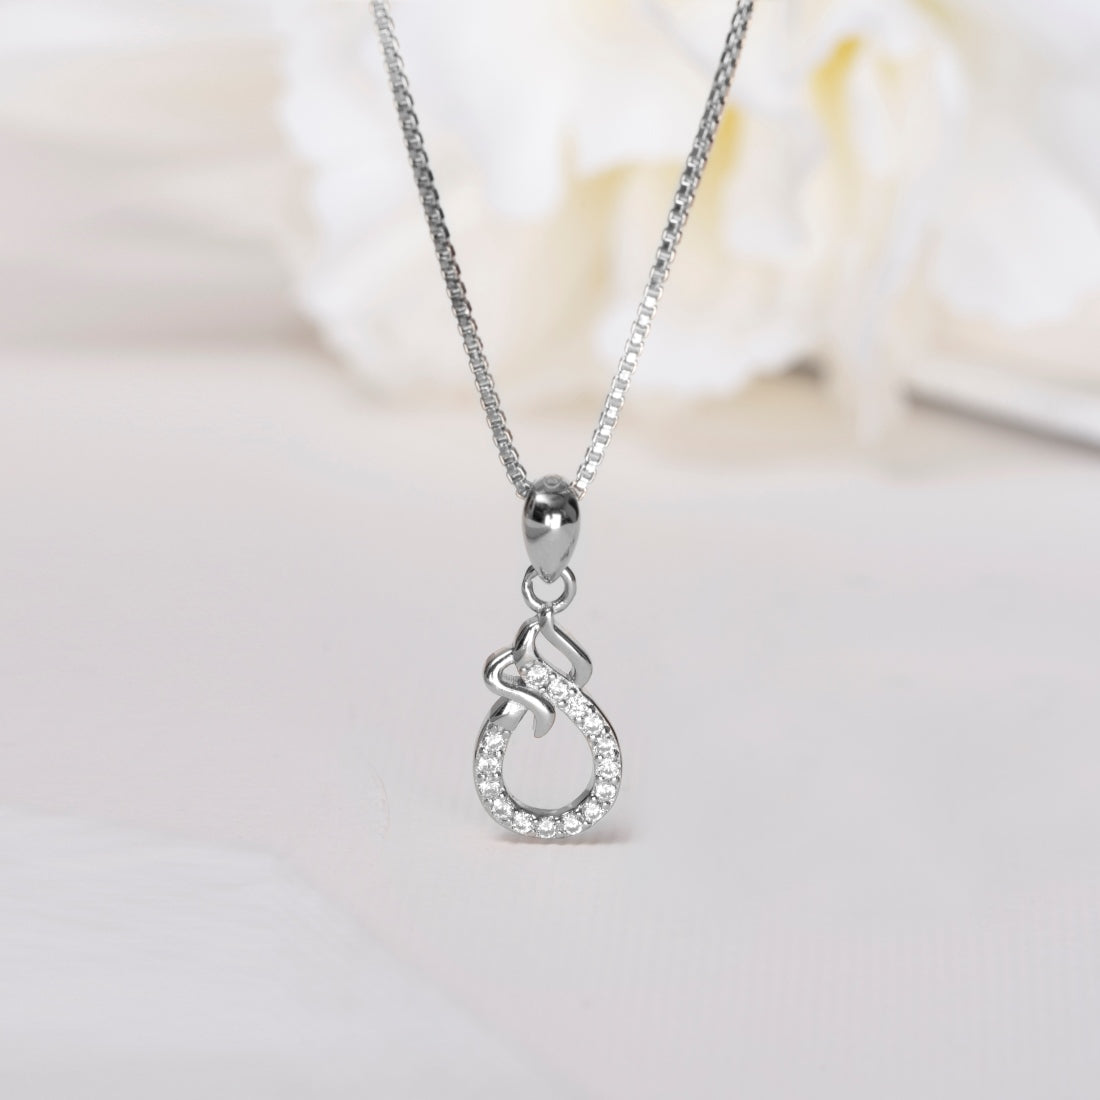 Embraced Eternal Sparkle Rhodium Plated 925 Sterling Silver Pendant with Chain